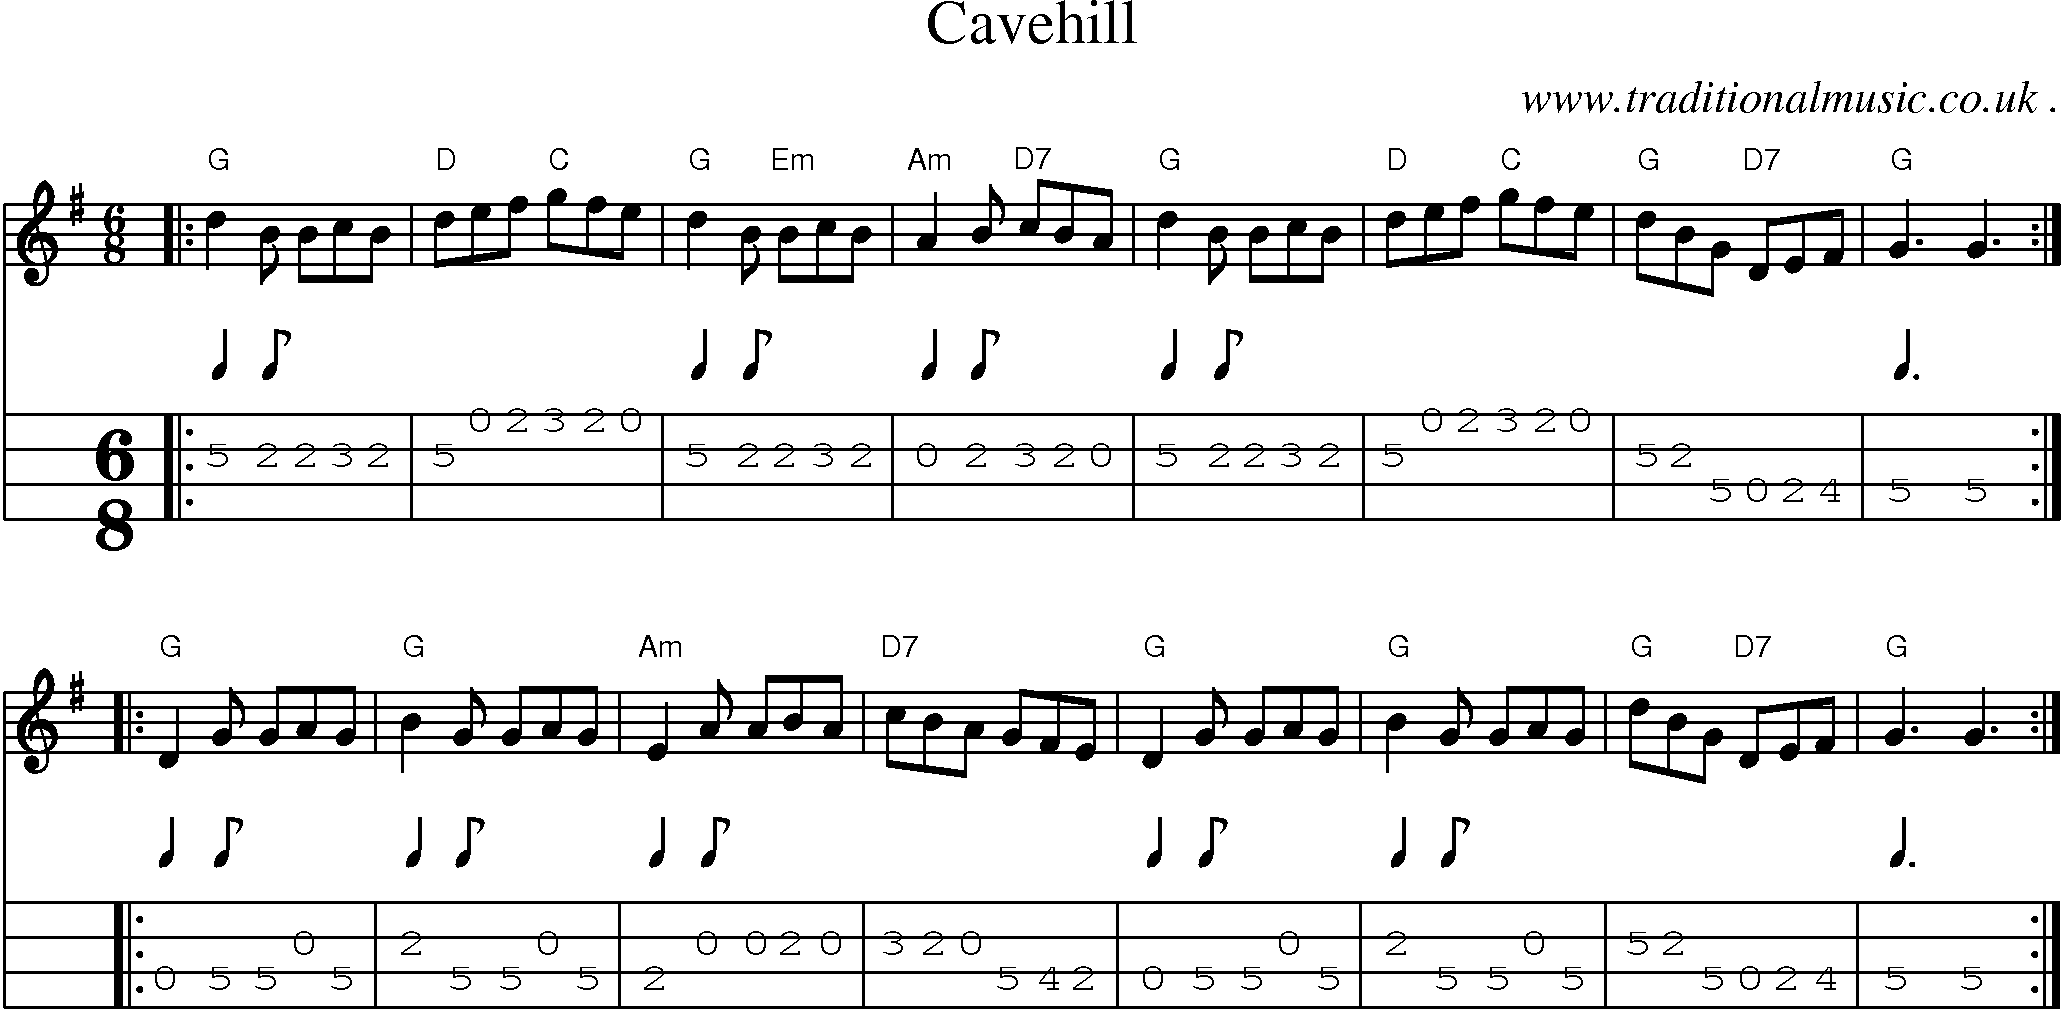 Sheet-music  score, Chords and Mandolin Tabs for Cavehill